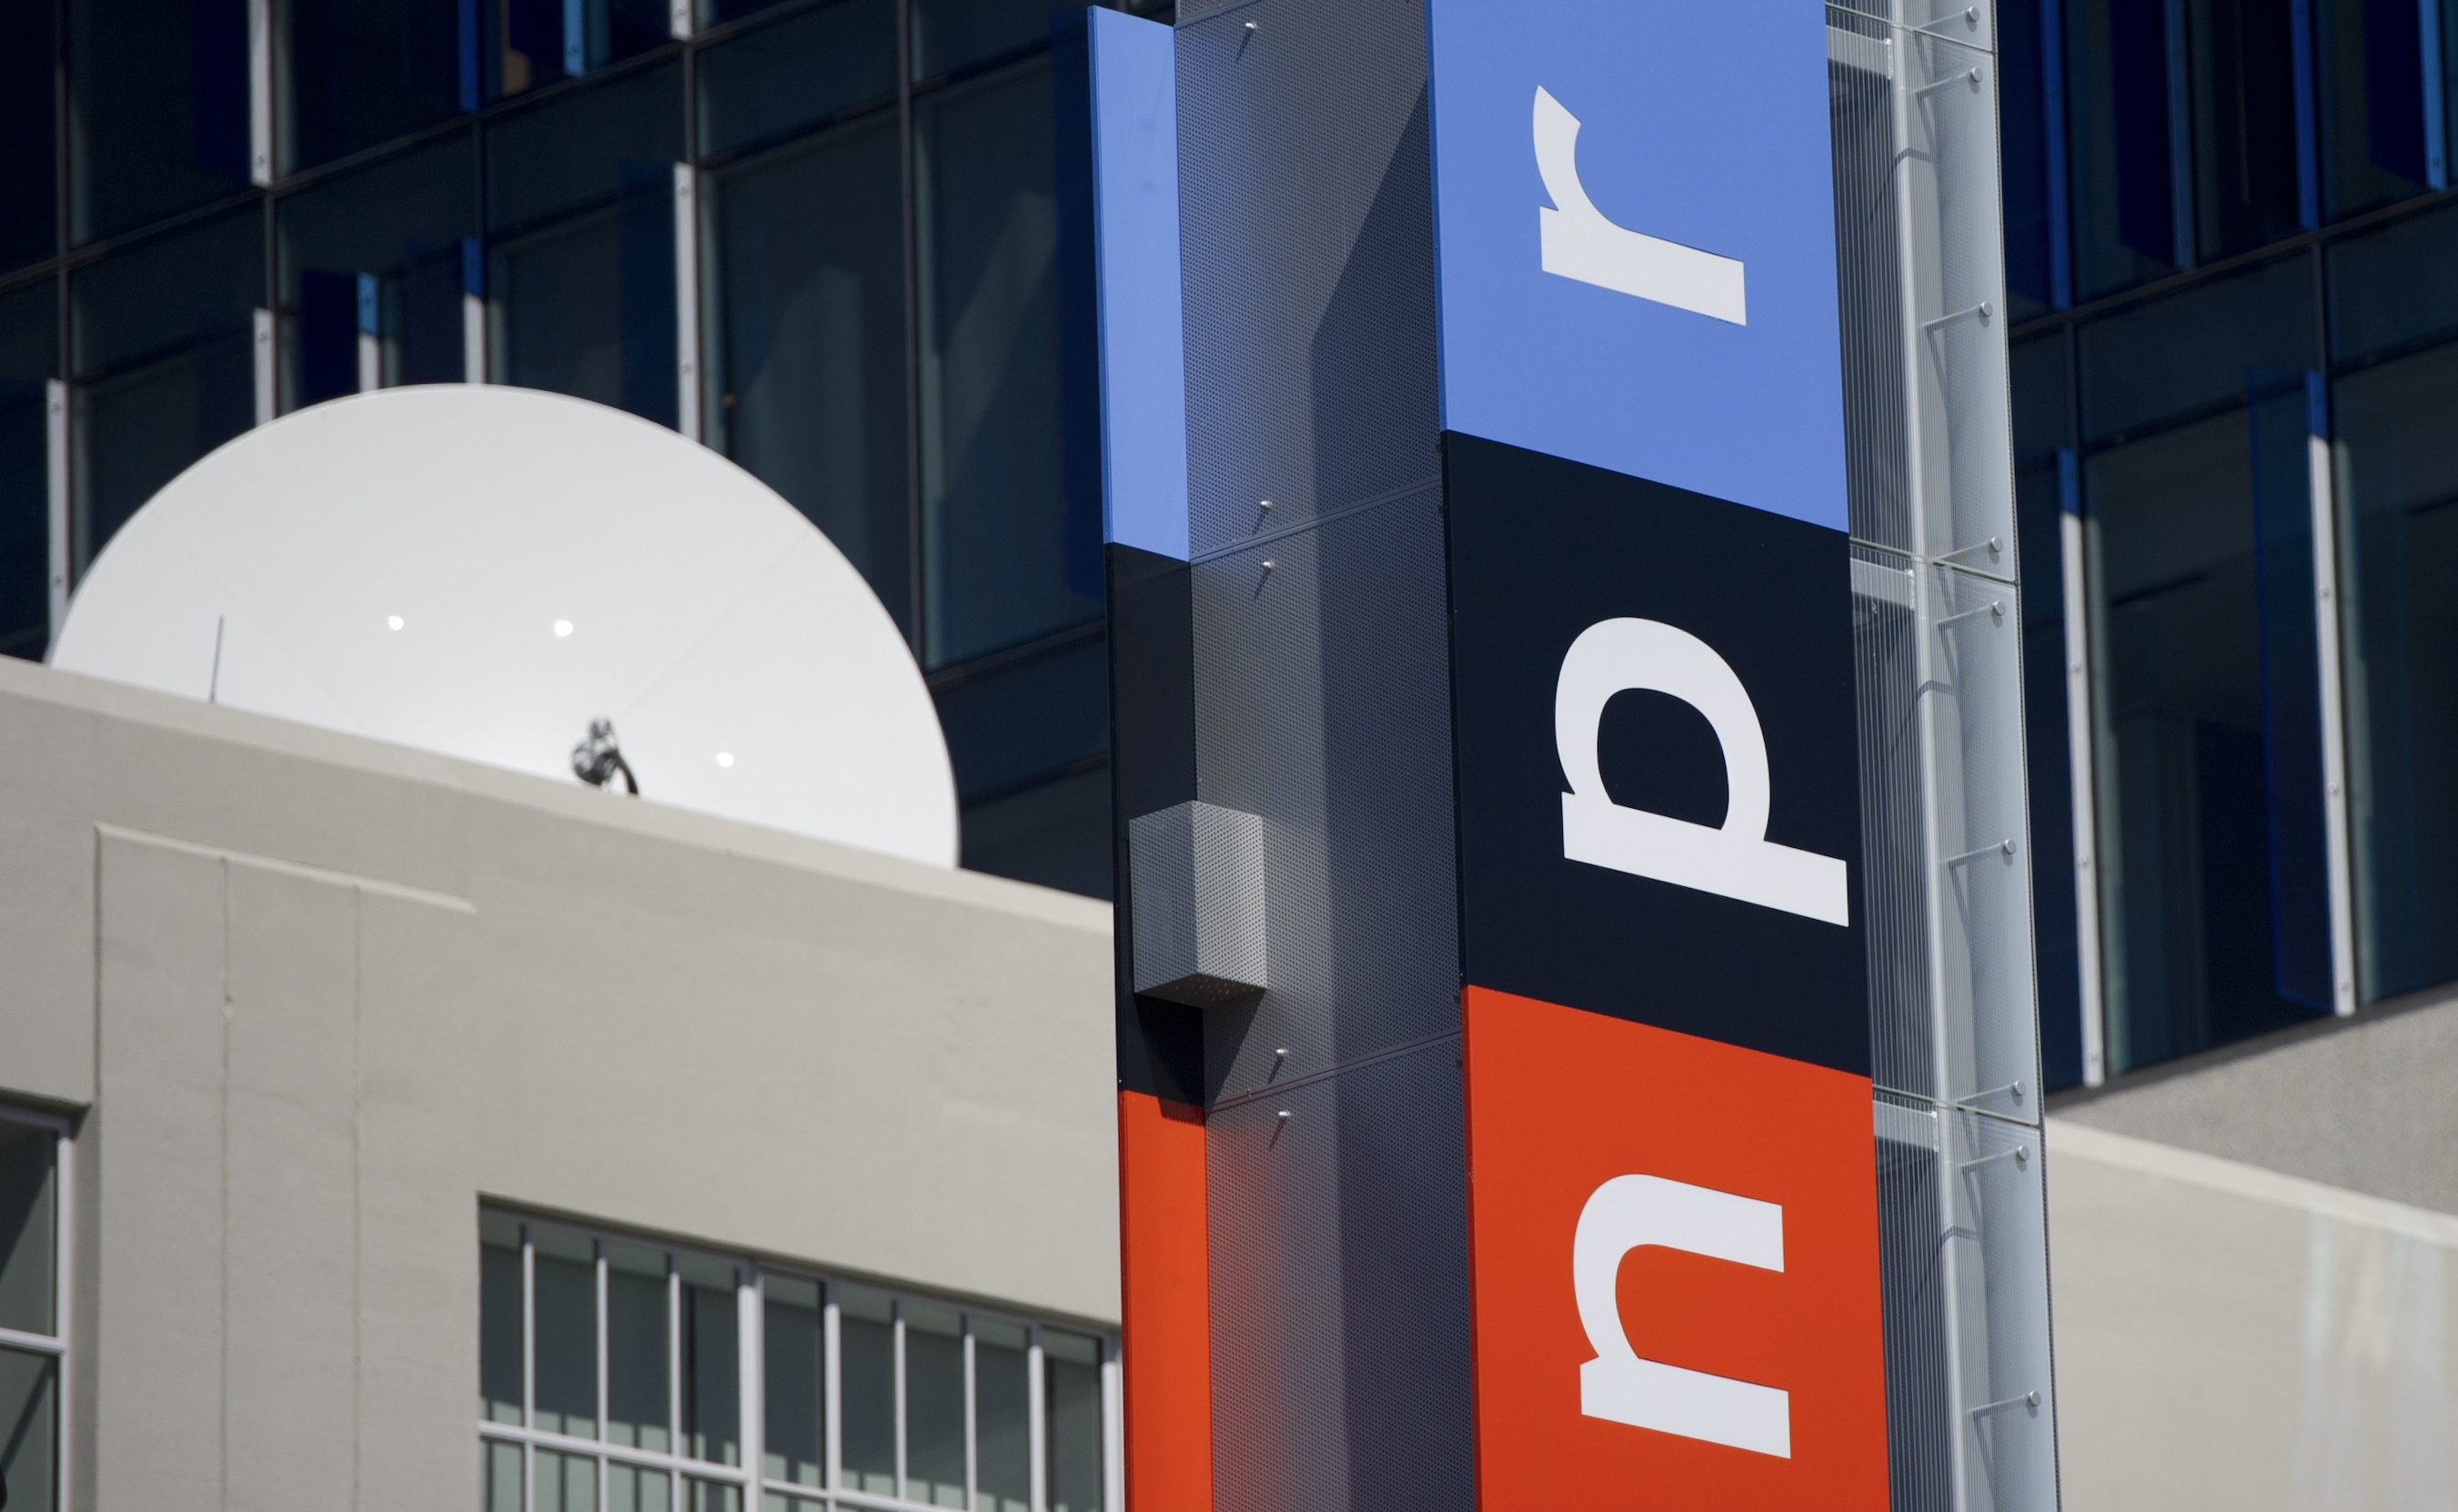 NPR Gets Slapped With Warning Label On Twitter, Lashes Out In Statement